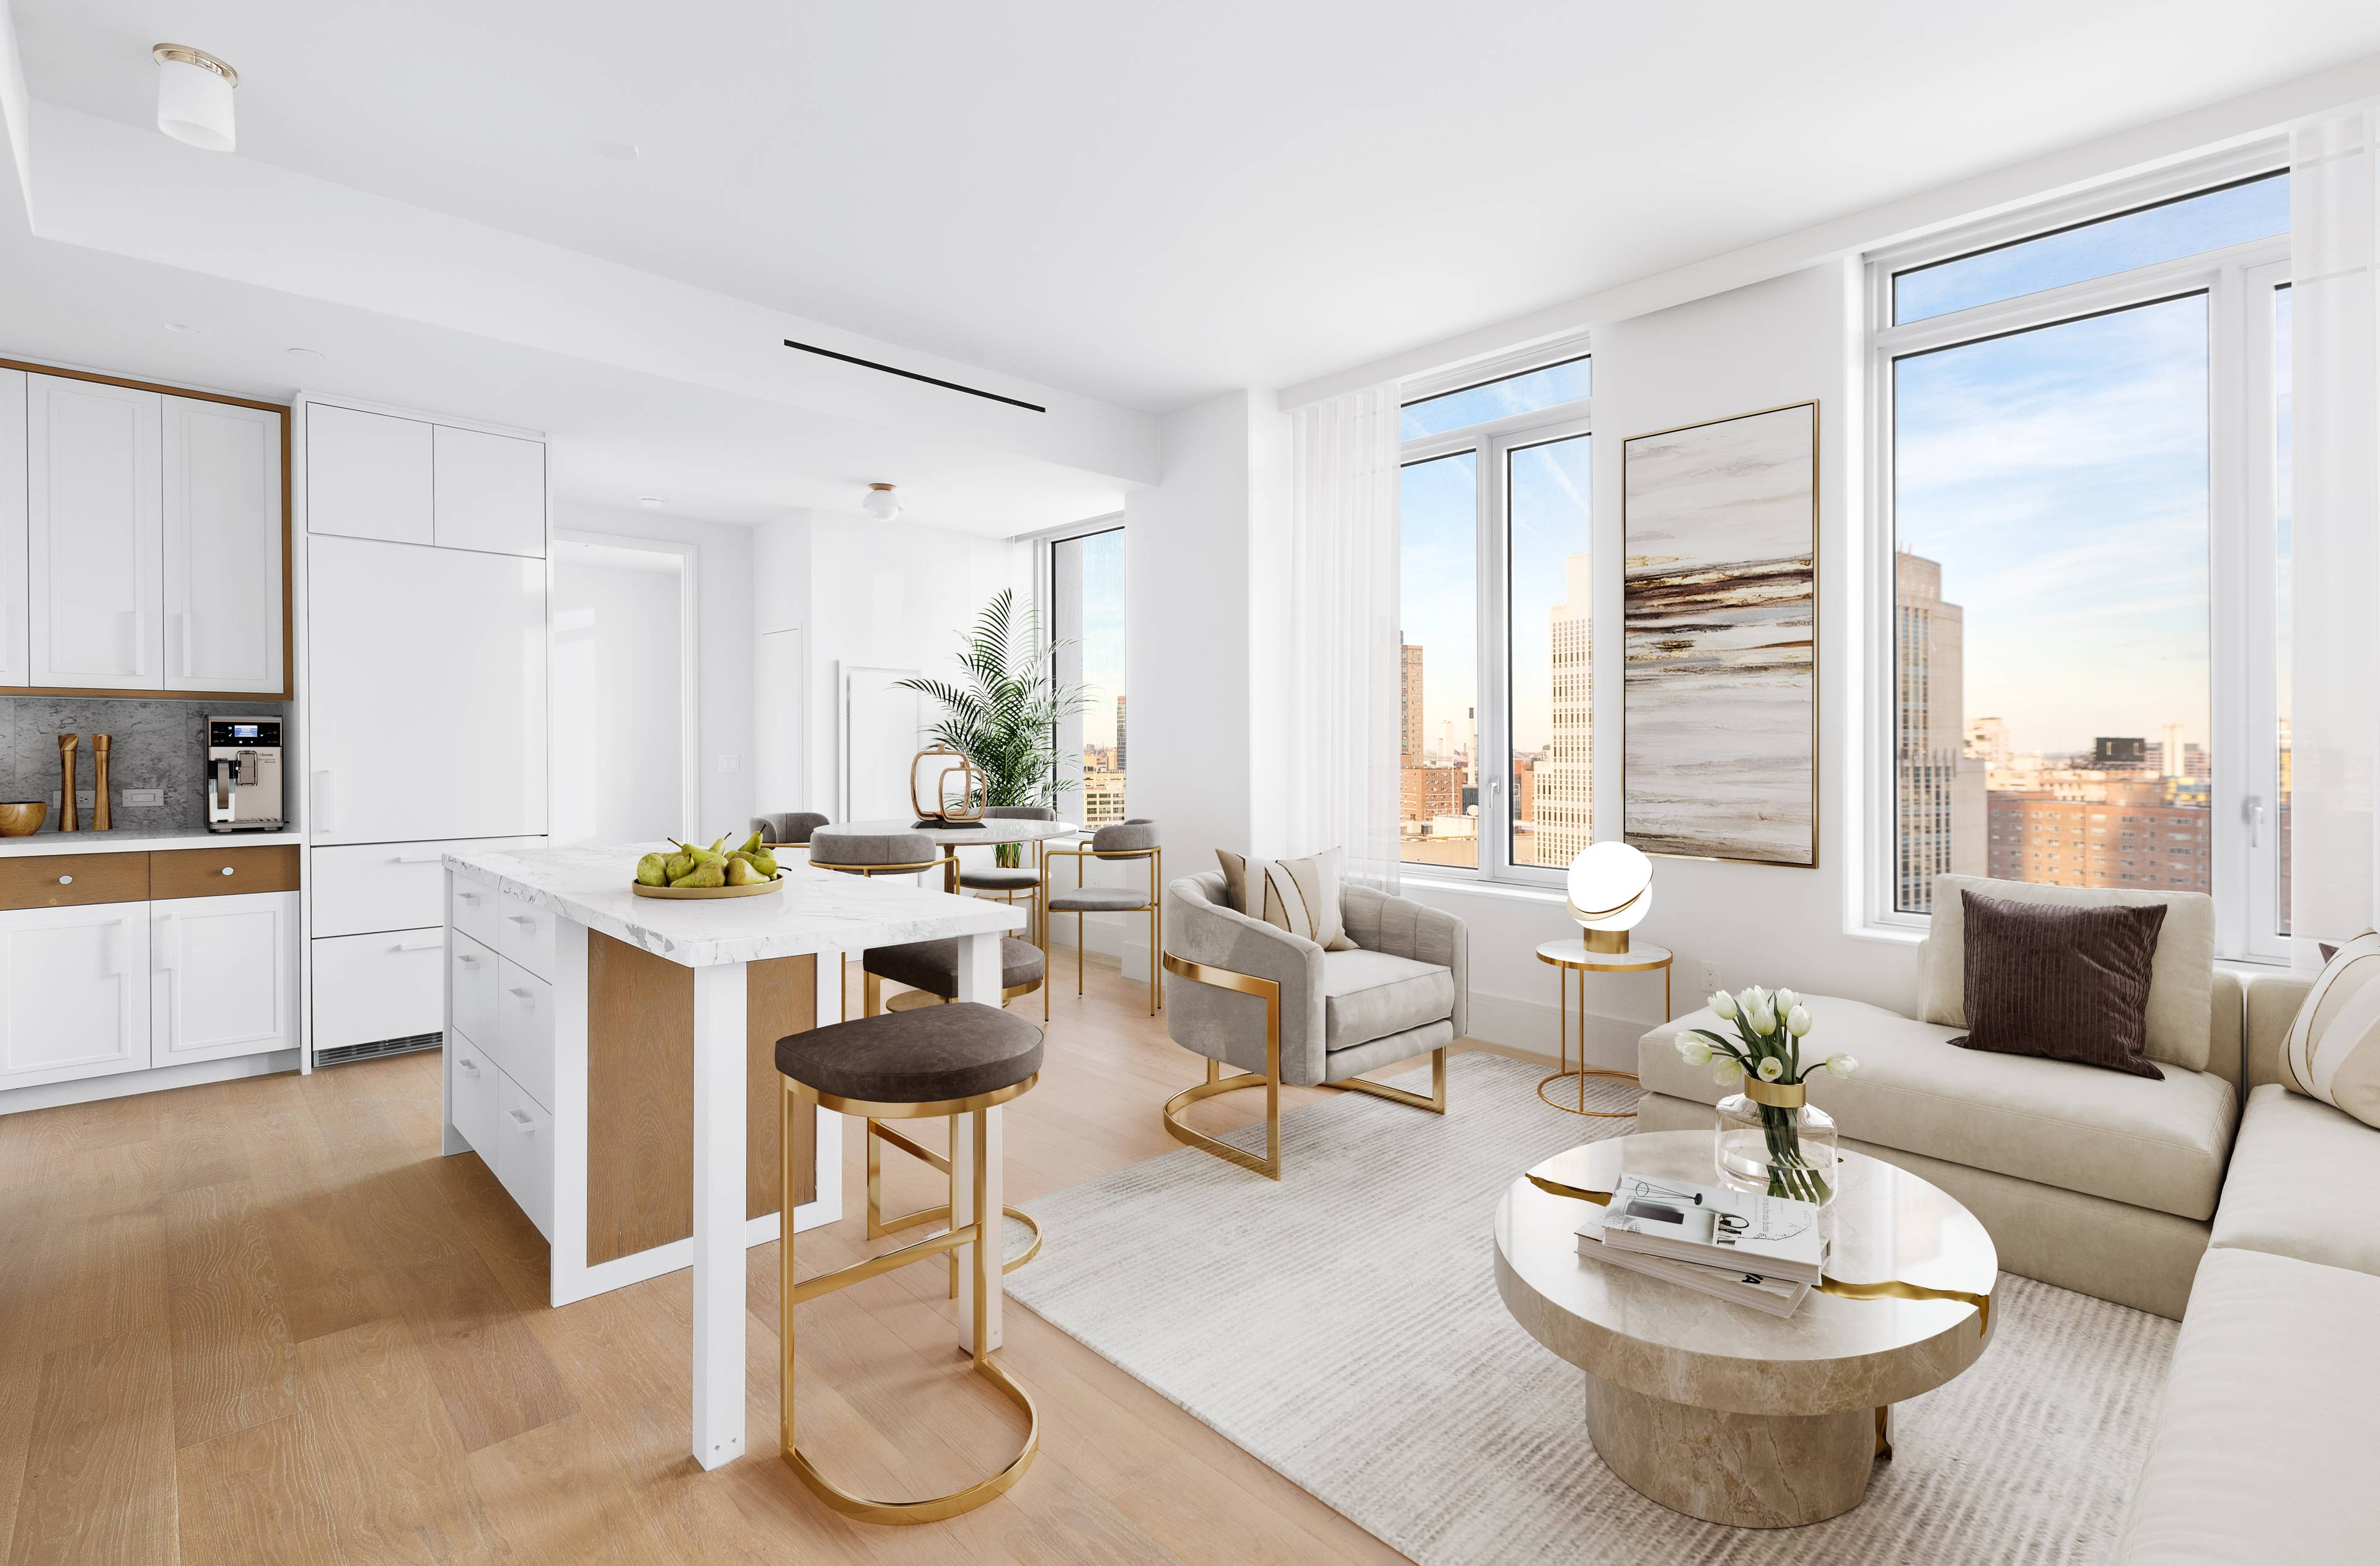 Generous proportions, luxury finishes, and Brooklyn s most convenient location make this a perfect apartment to call home.